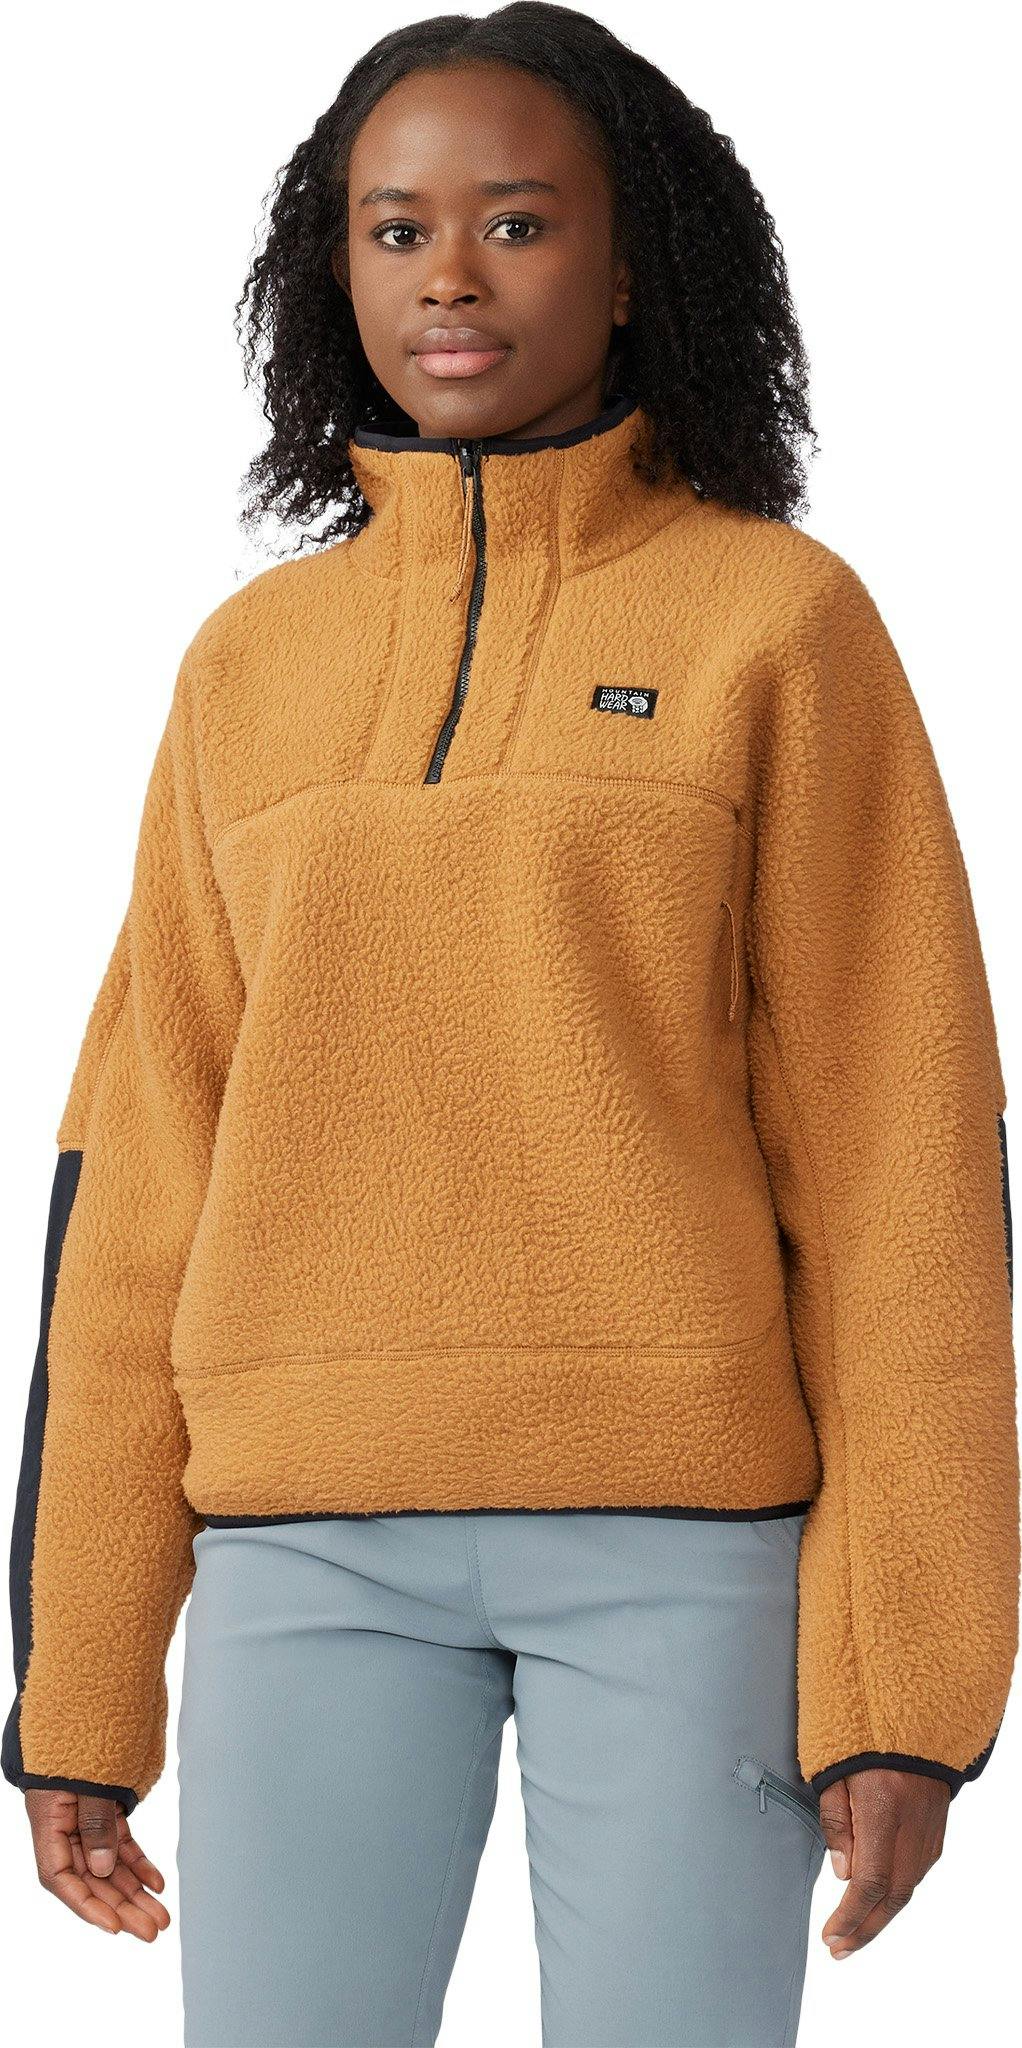 Product image for HiCamp Fleece Pullover - Women's